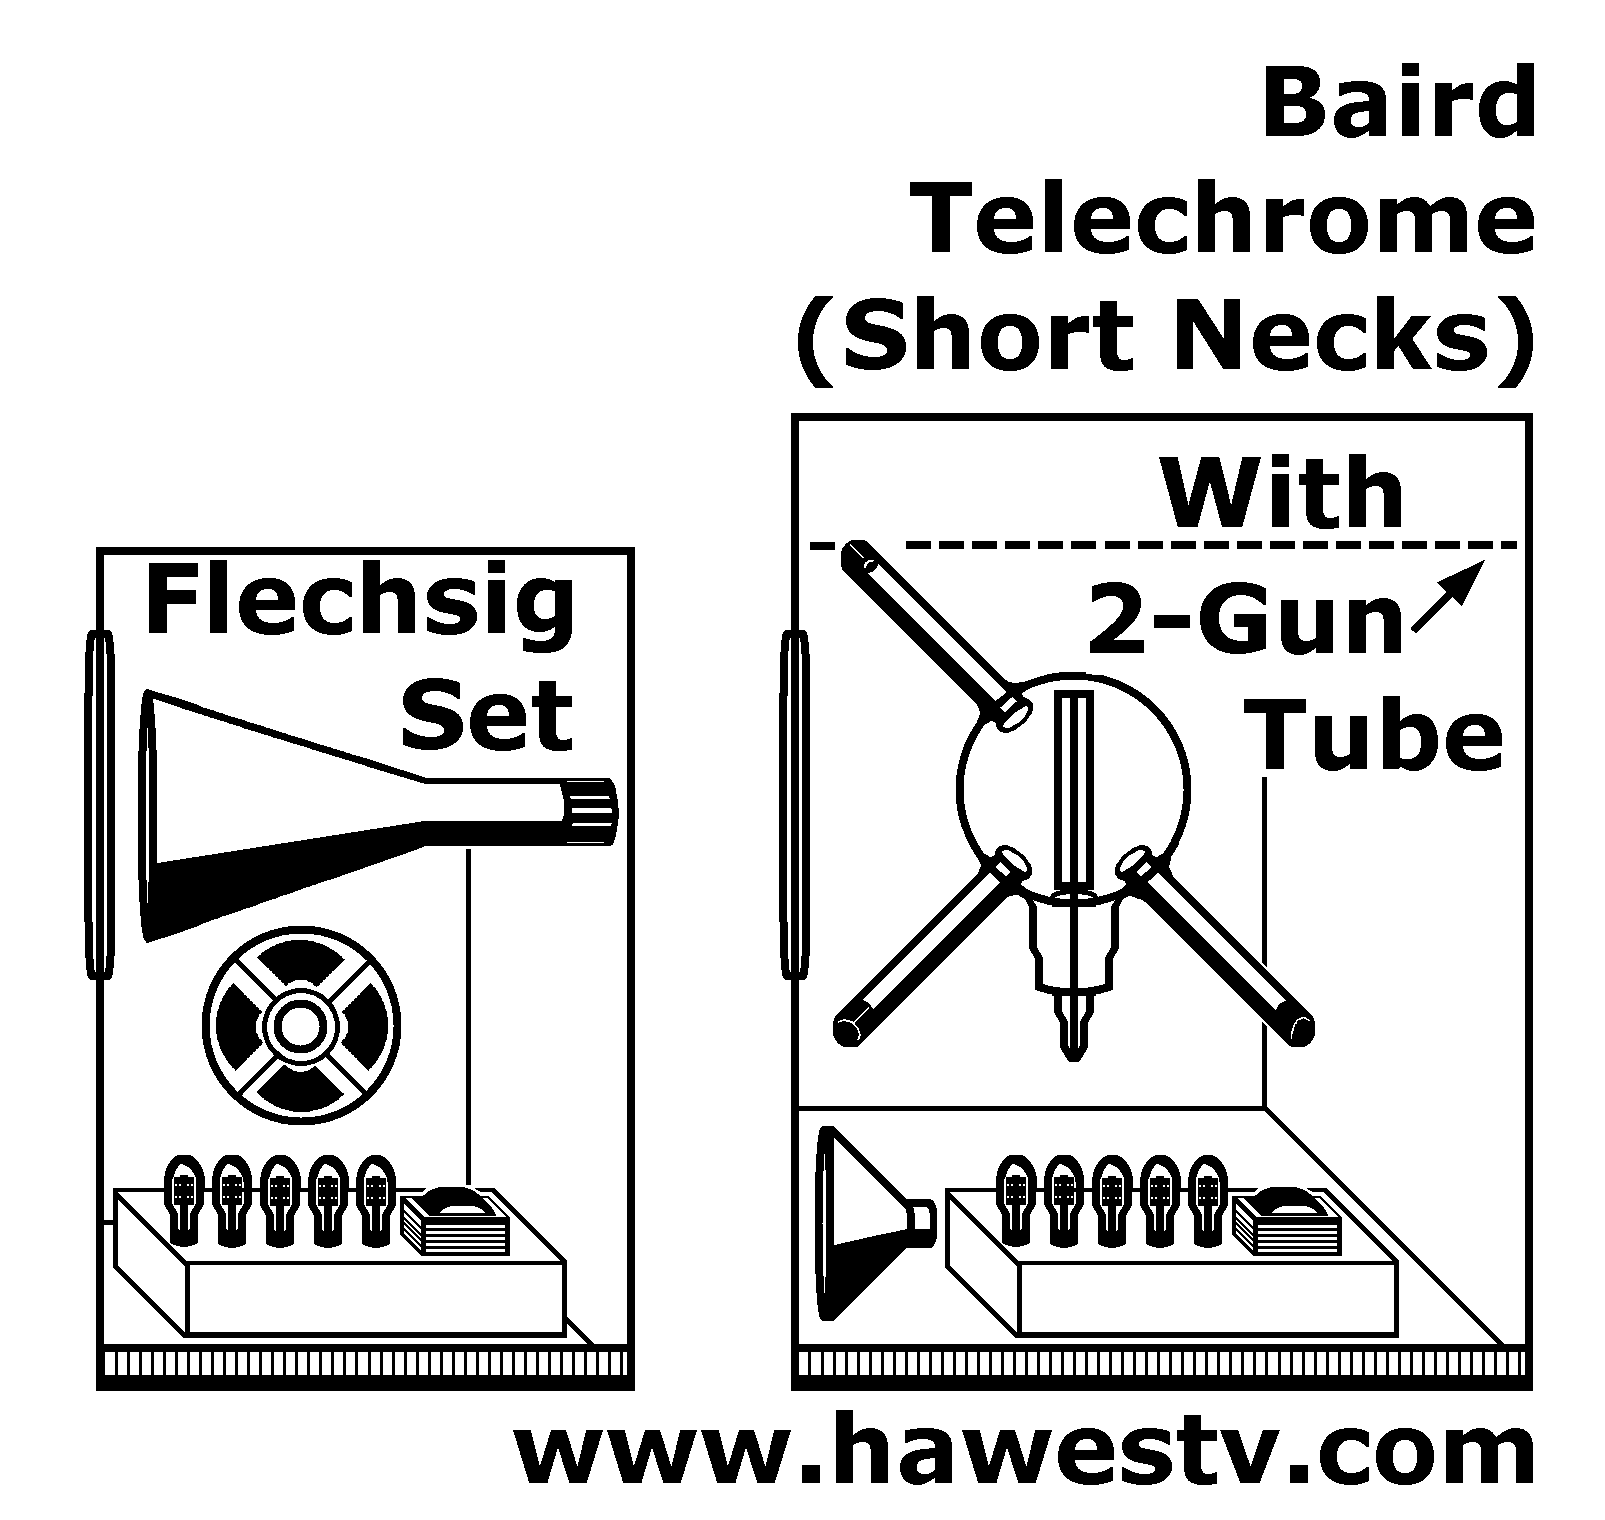 Art: Comparing size of Flechsig set to Telechrome in Baird patent (hypothetical), 2 vs. 3-color 
        version